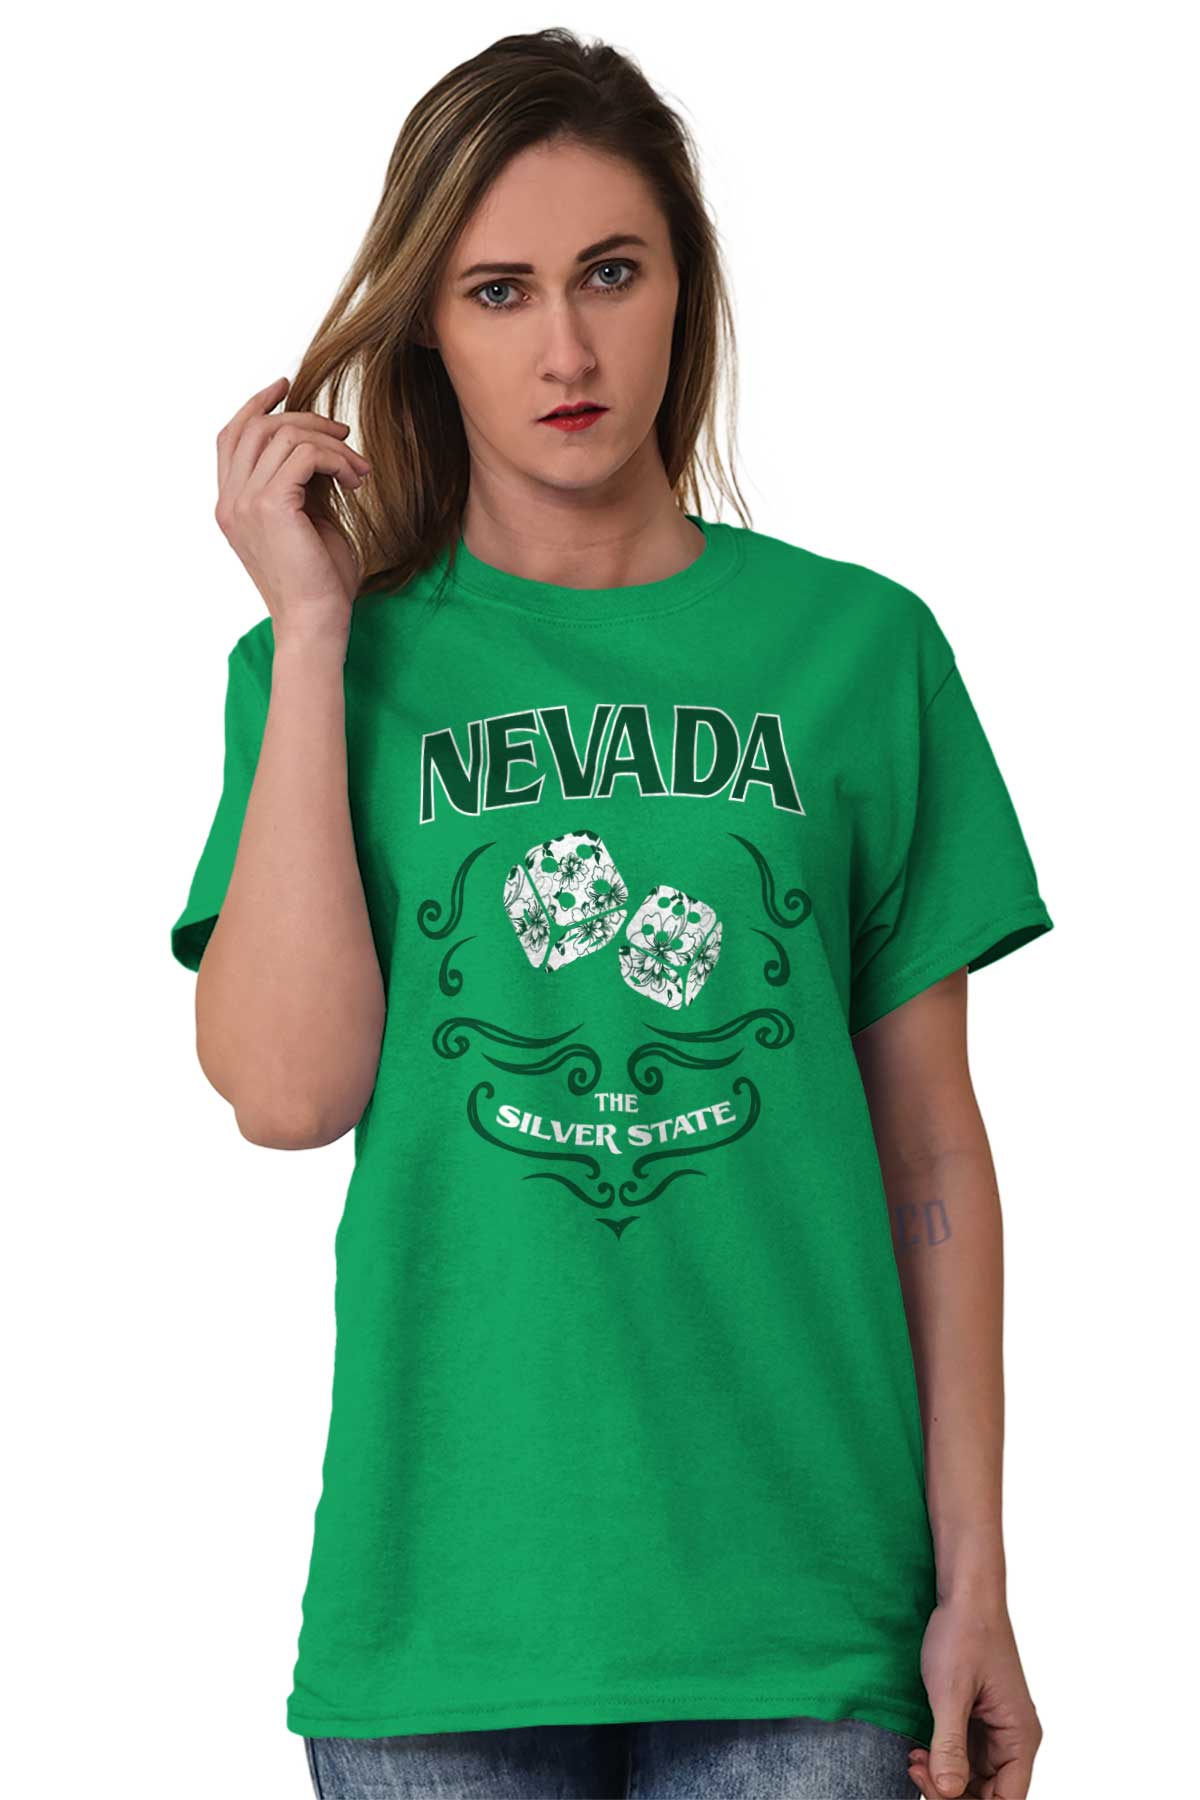 Cute Nevada Lucky Dice Floral NV Women's Graphic T Shirt Tees Brisco Brands 3X - image 3 of 6